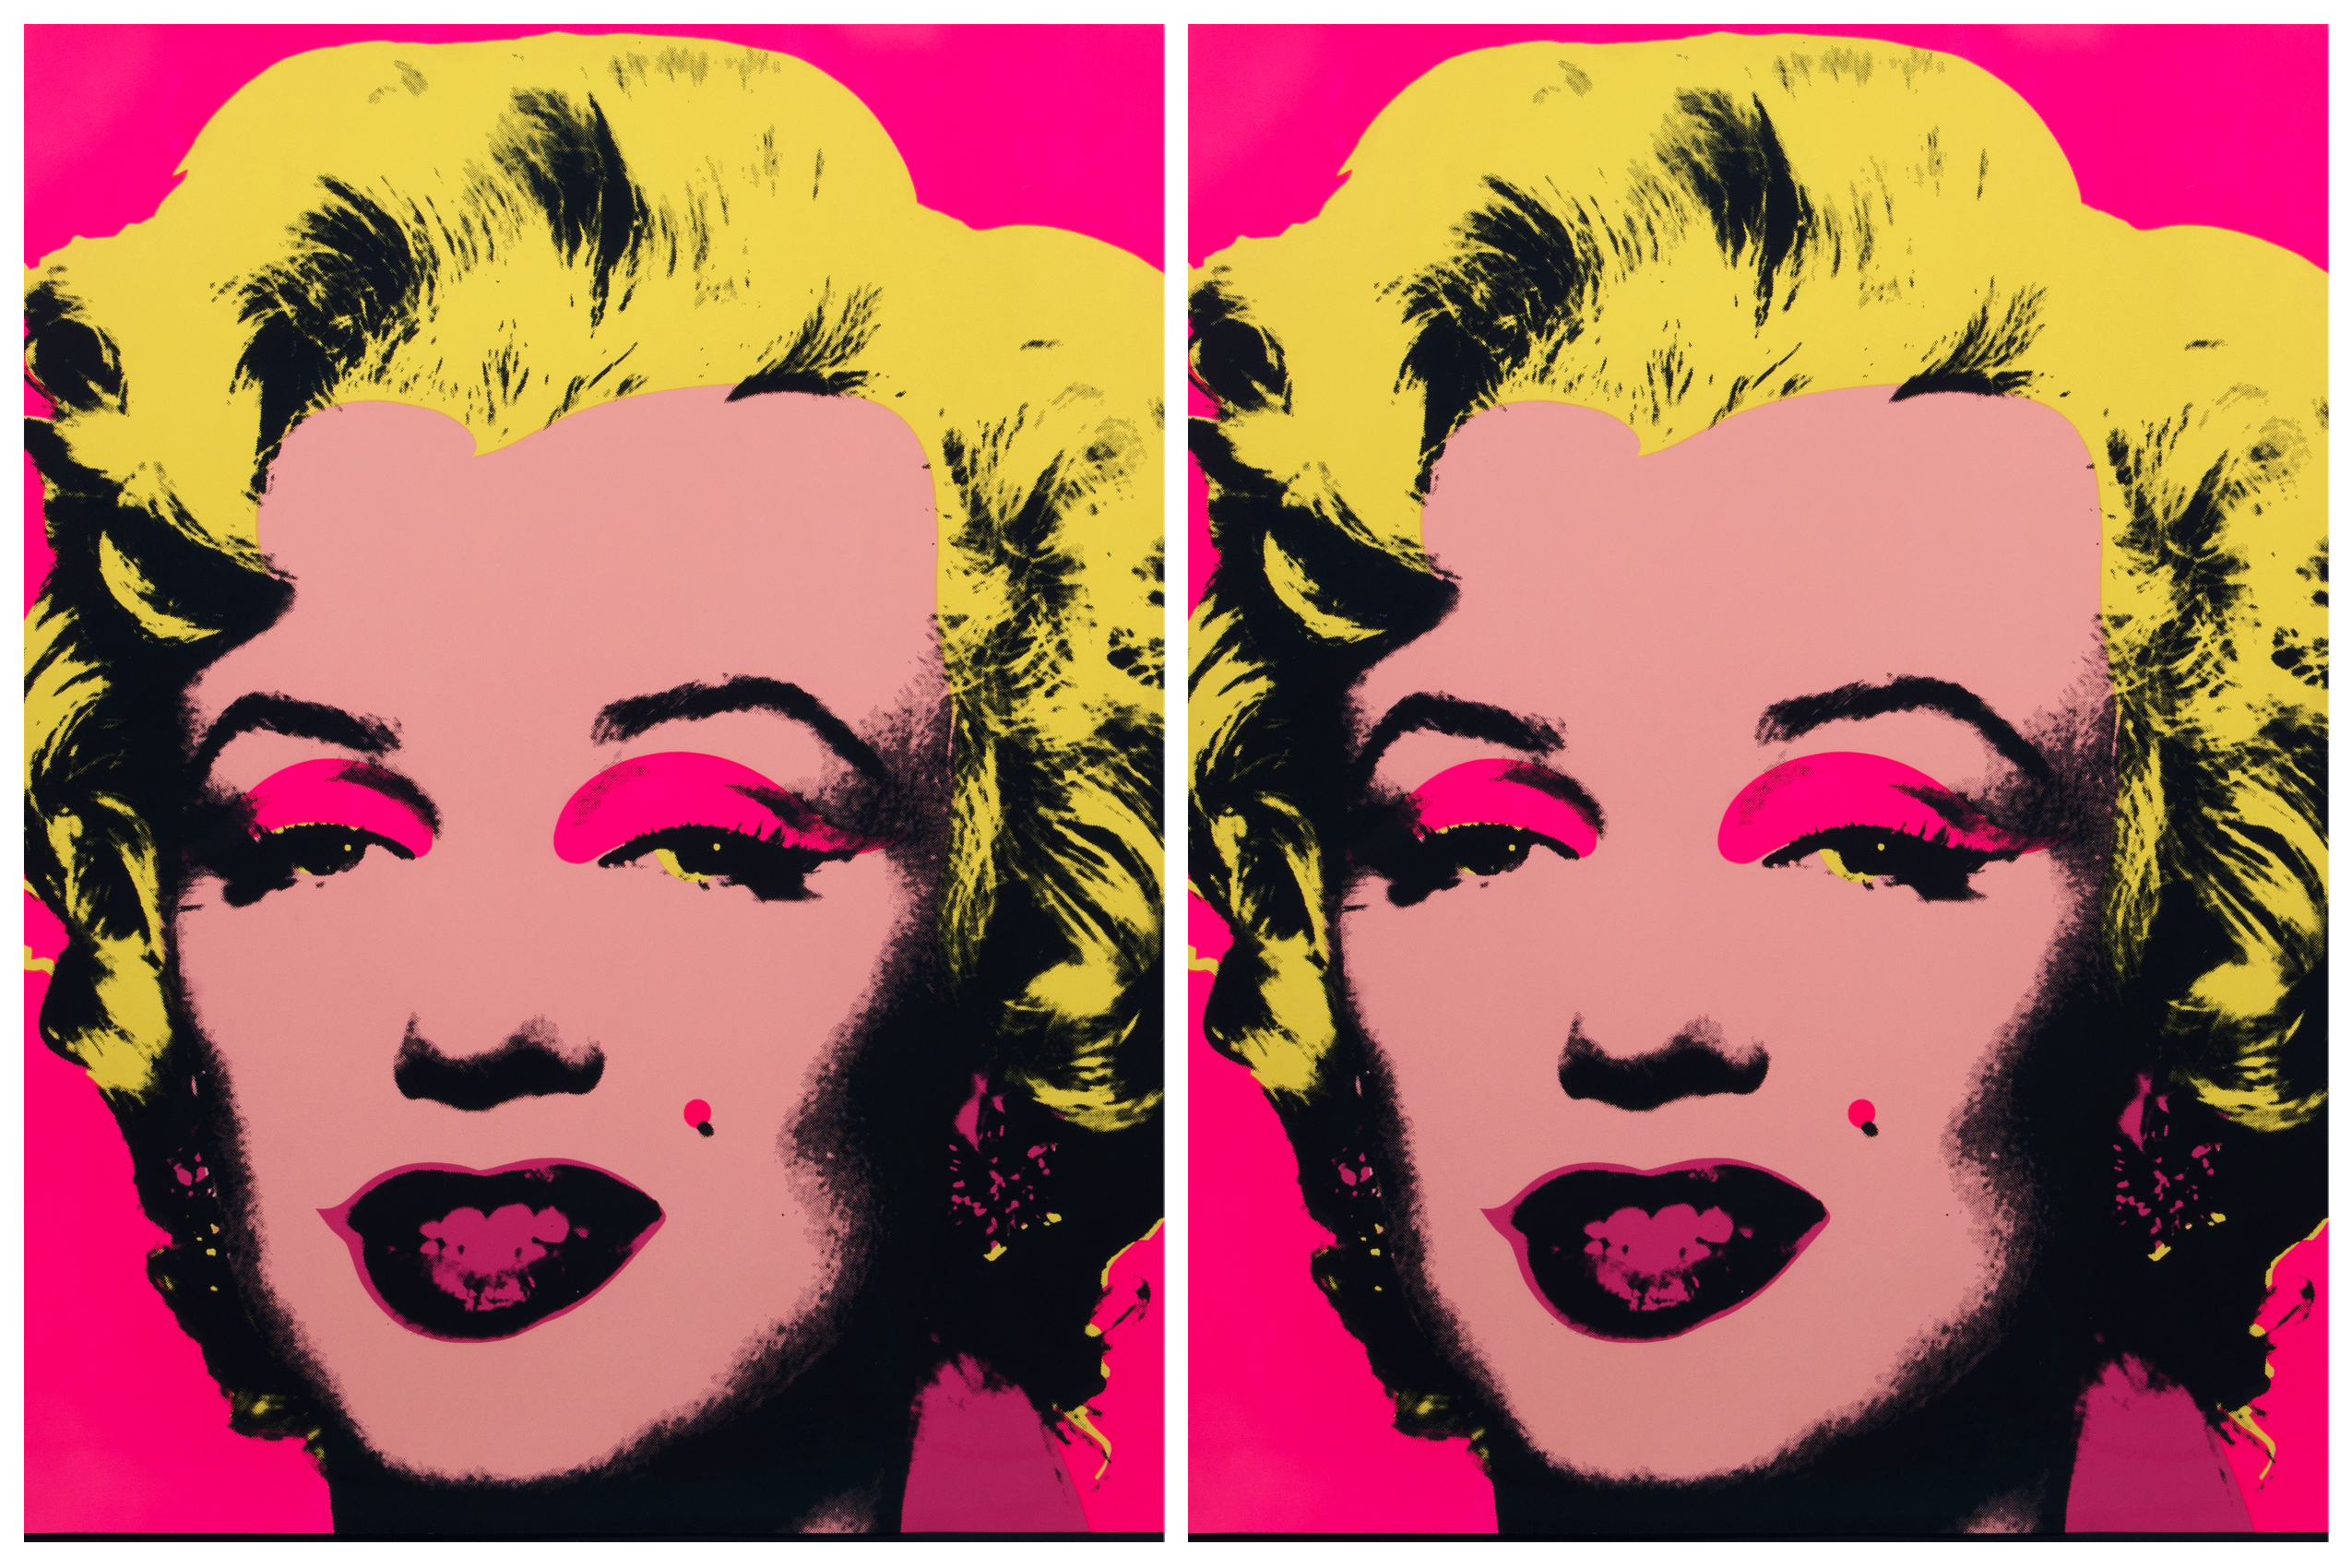 Bright pink print of Marilyn doubled